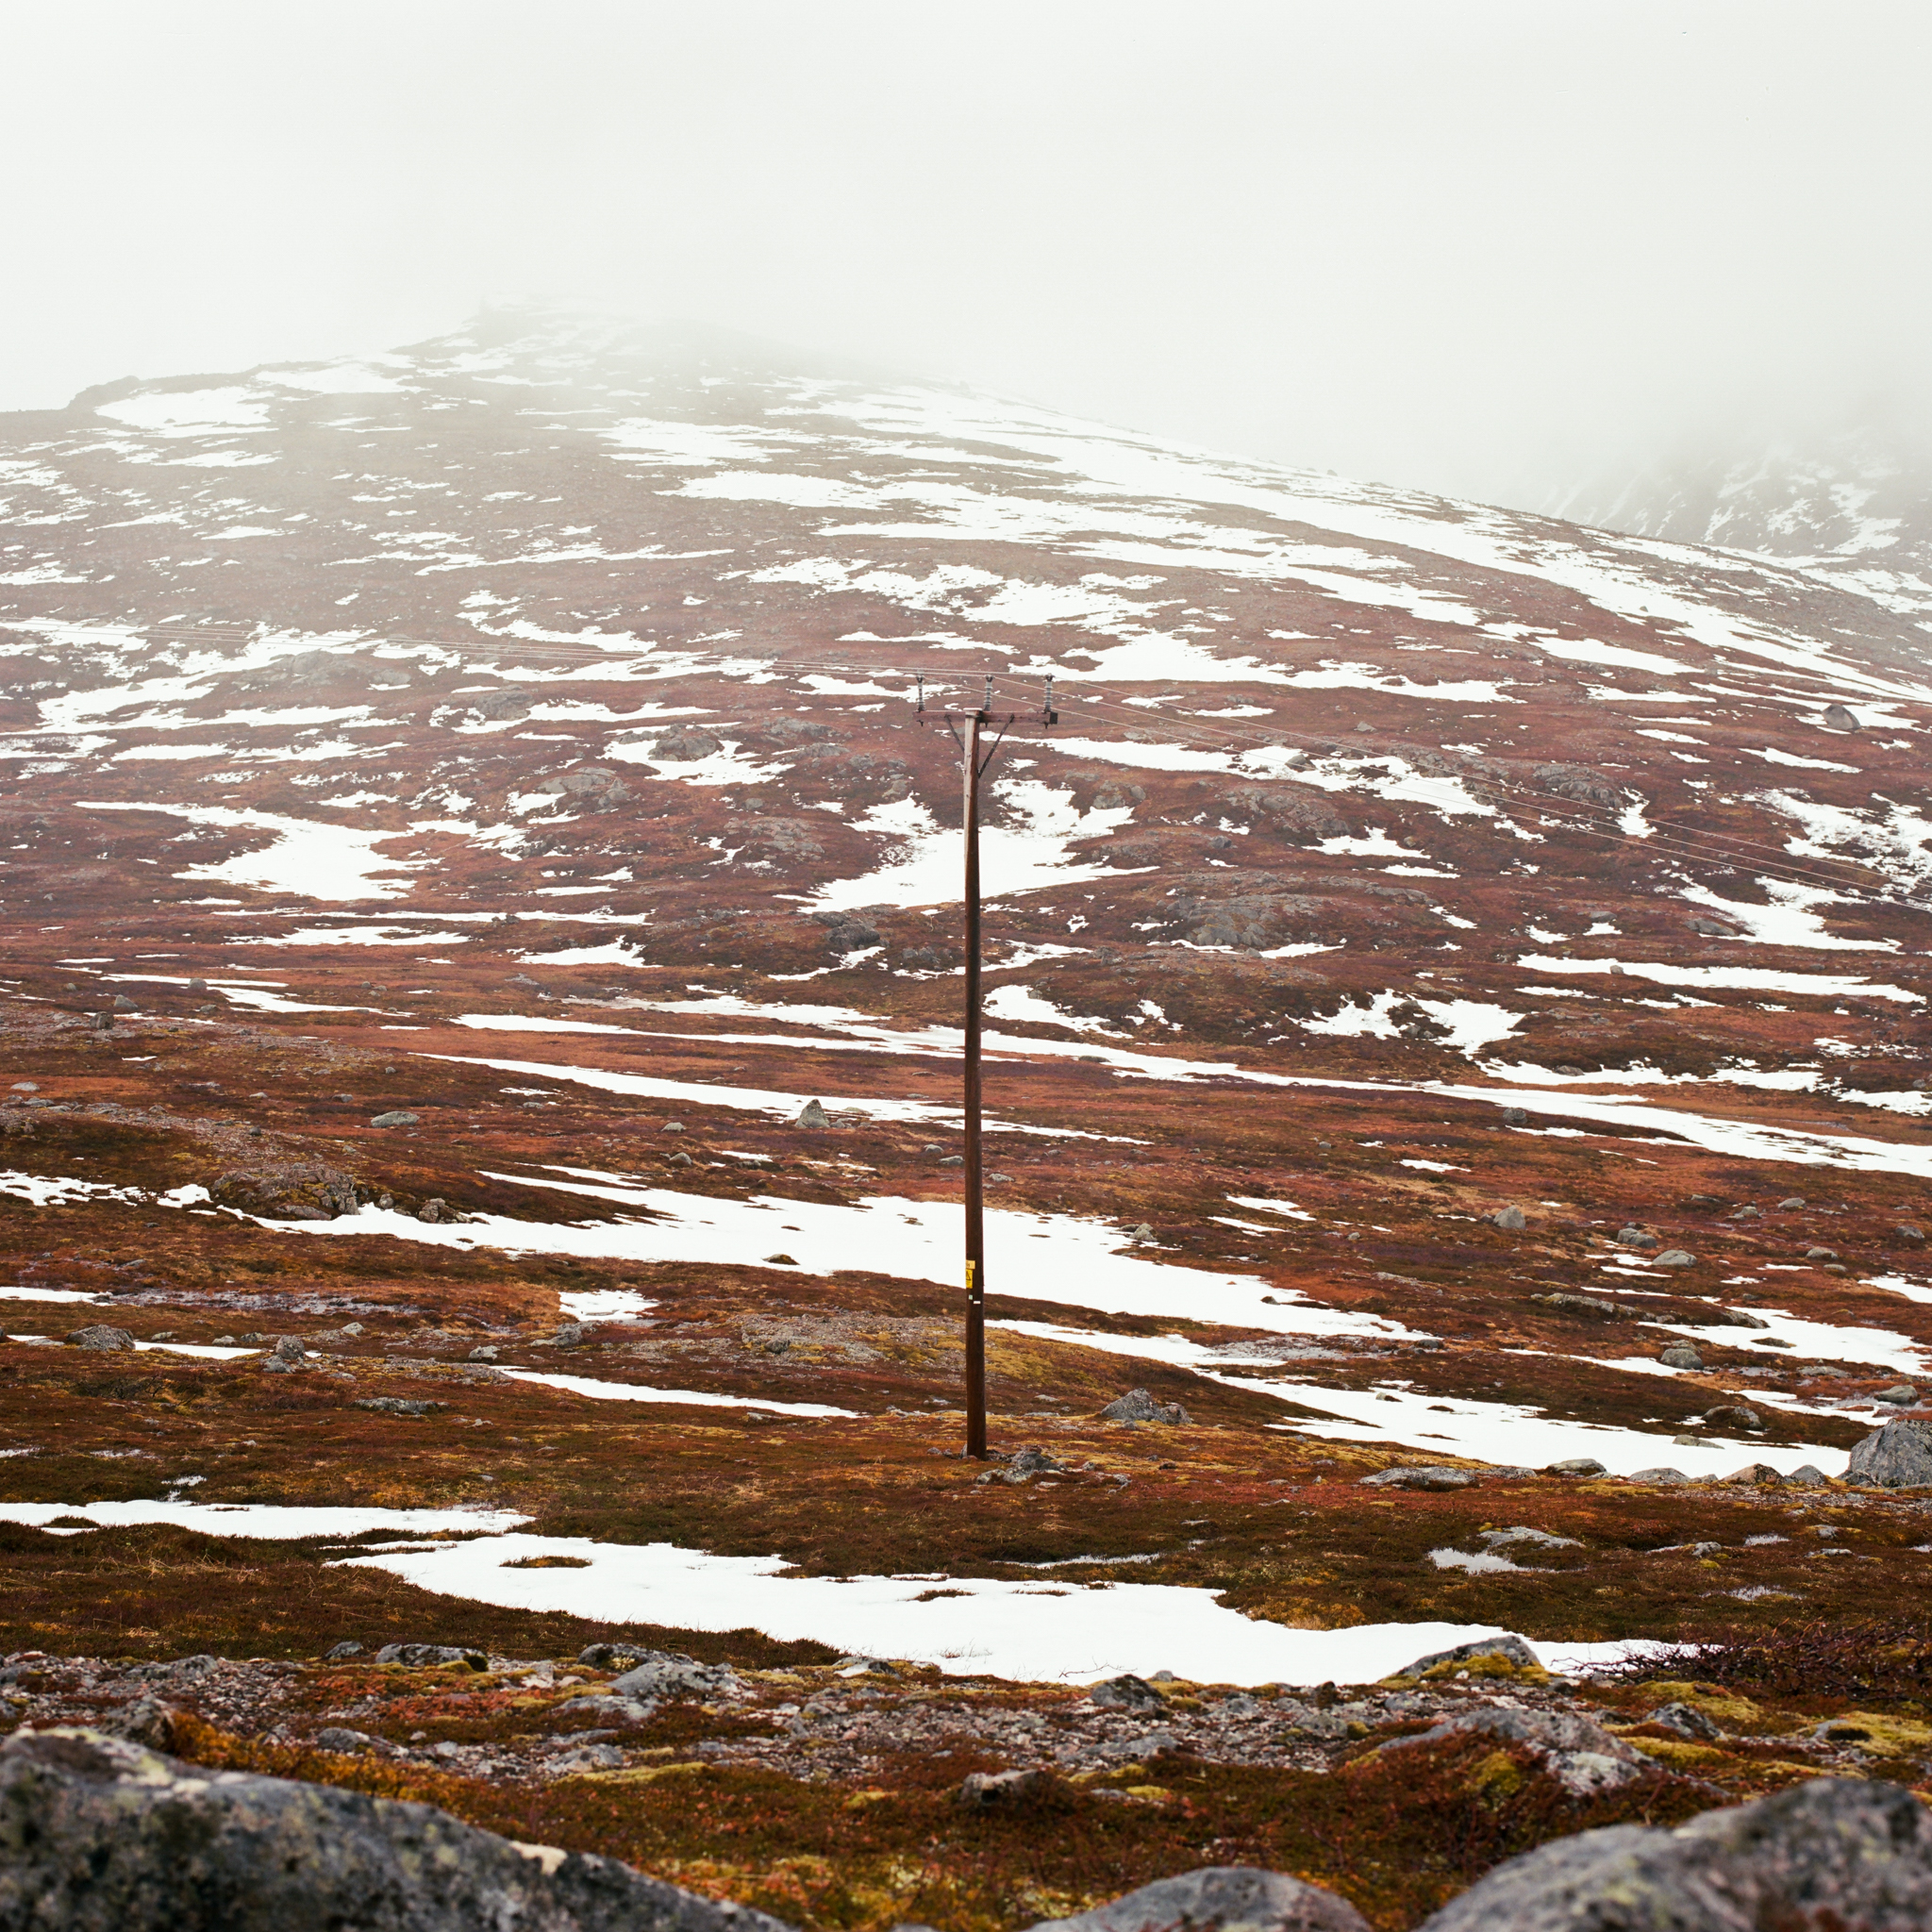 Telephone pole on a rocky mountain slope in Norway